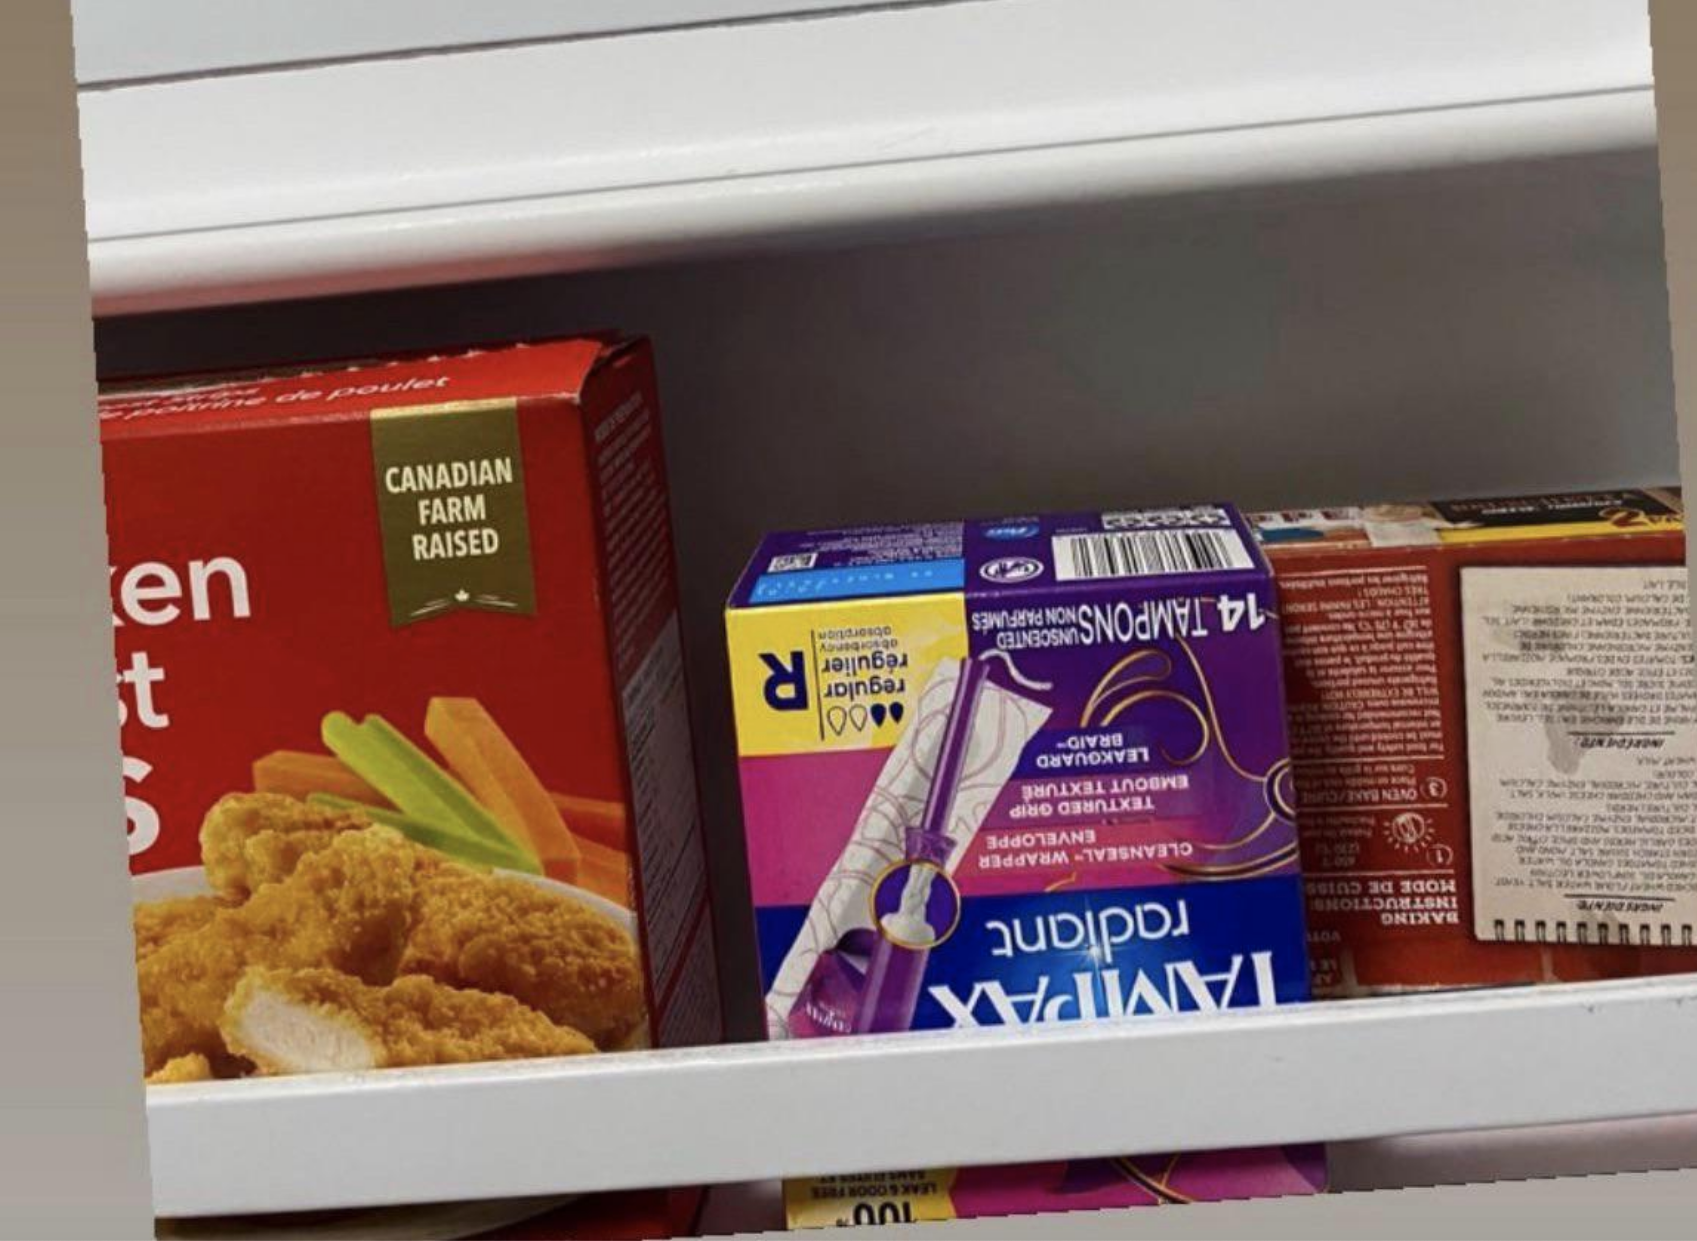 A box of tampons has been put upside down in the freezer next to boxed dinners and lunches